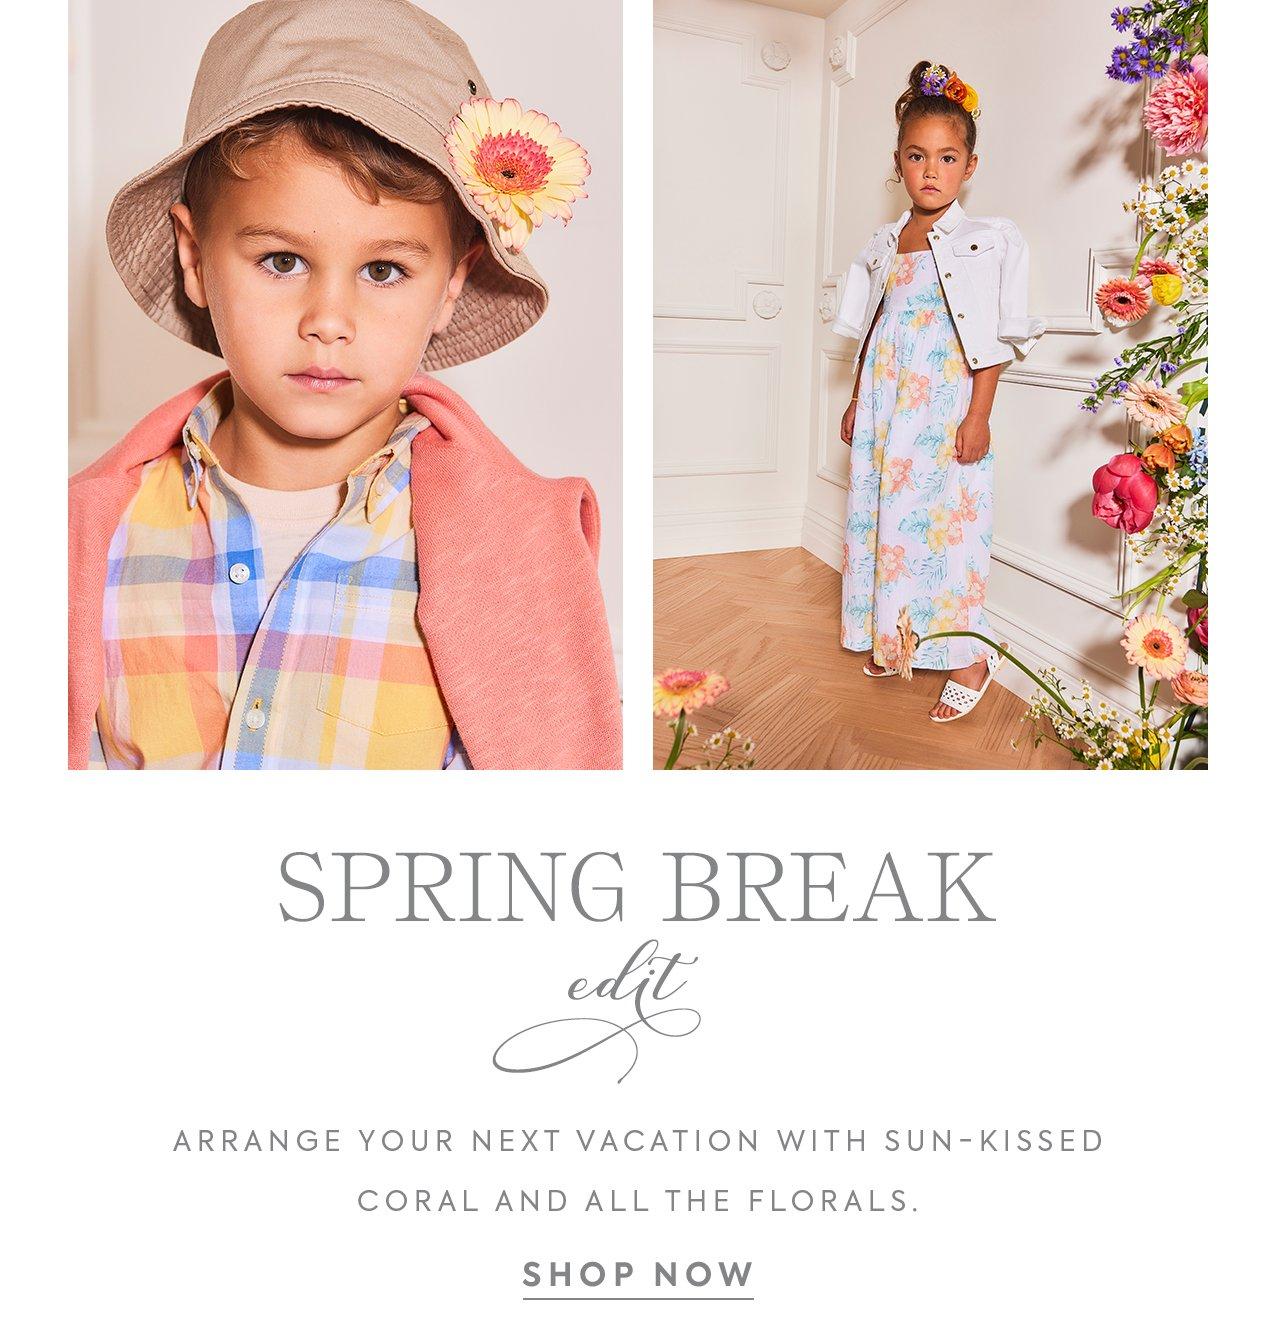 Janie and Jack Clothing: Quality and Style for Your Children